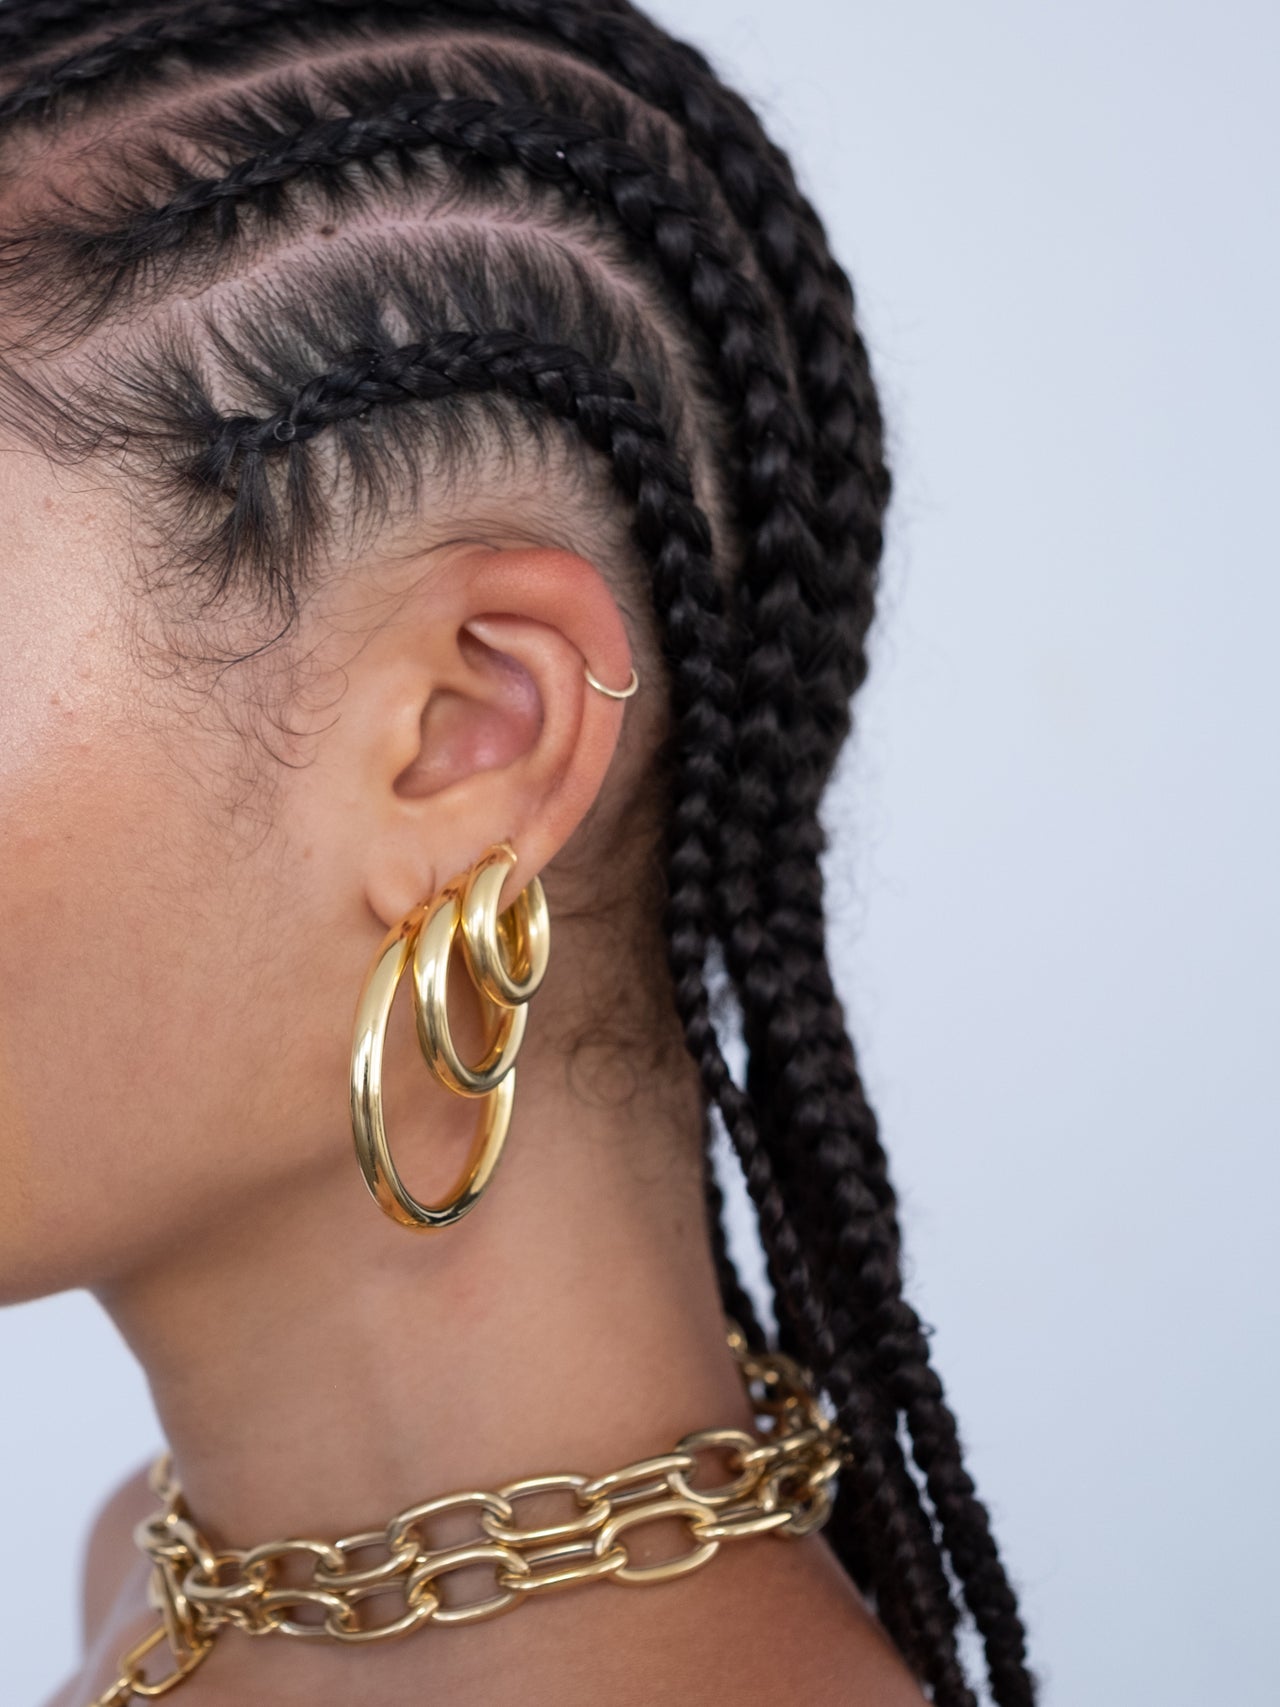 The Tru Hoops - Small, Medium and Large (Vermeil Gold) pictured on models ear. Grey backdrop